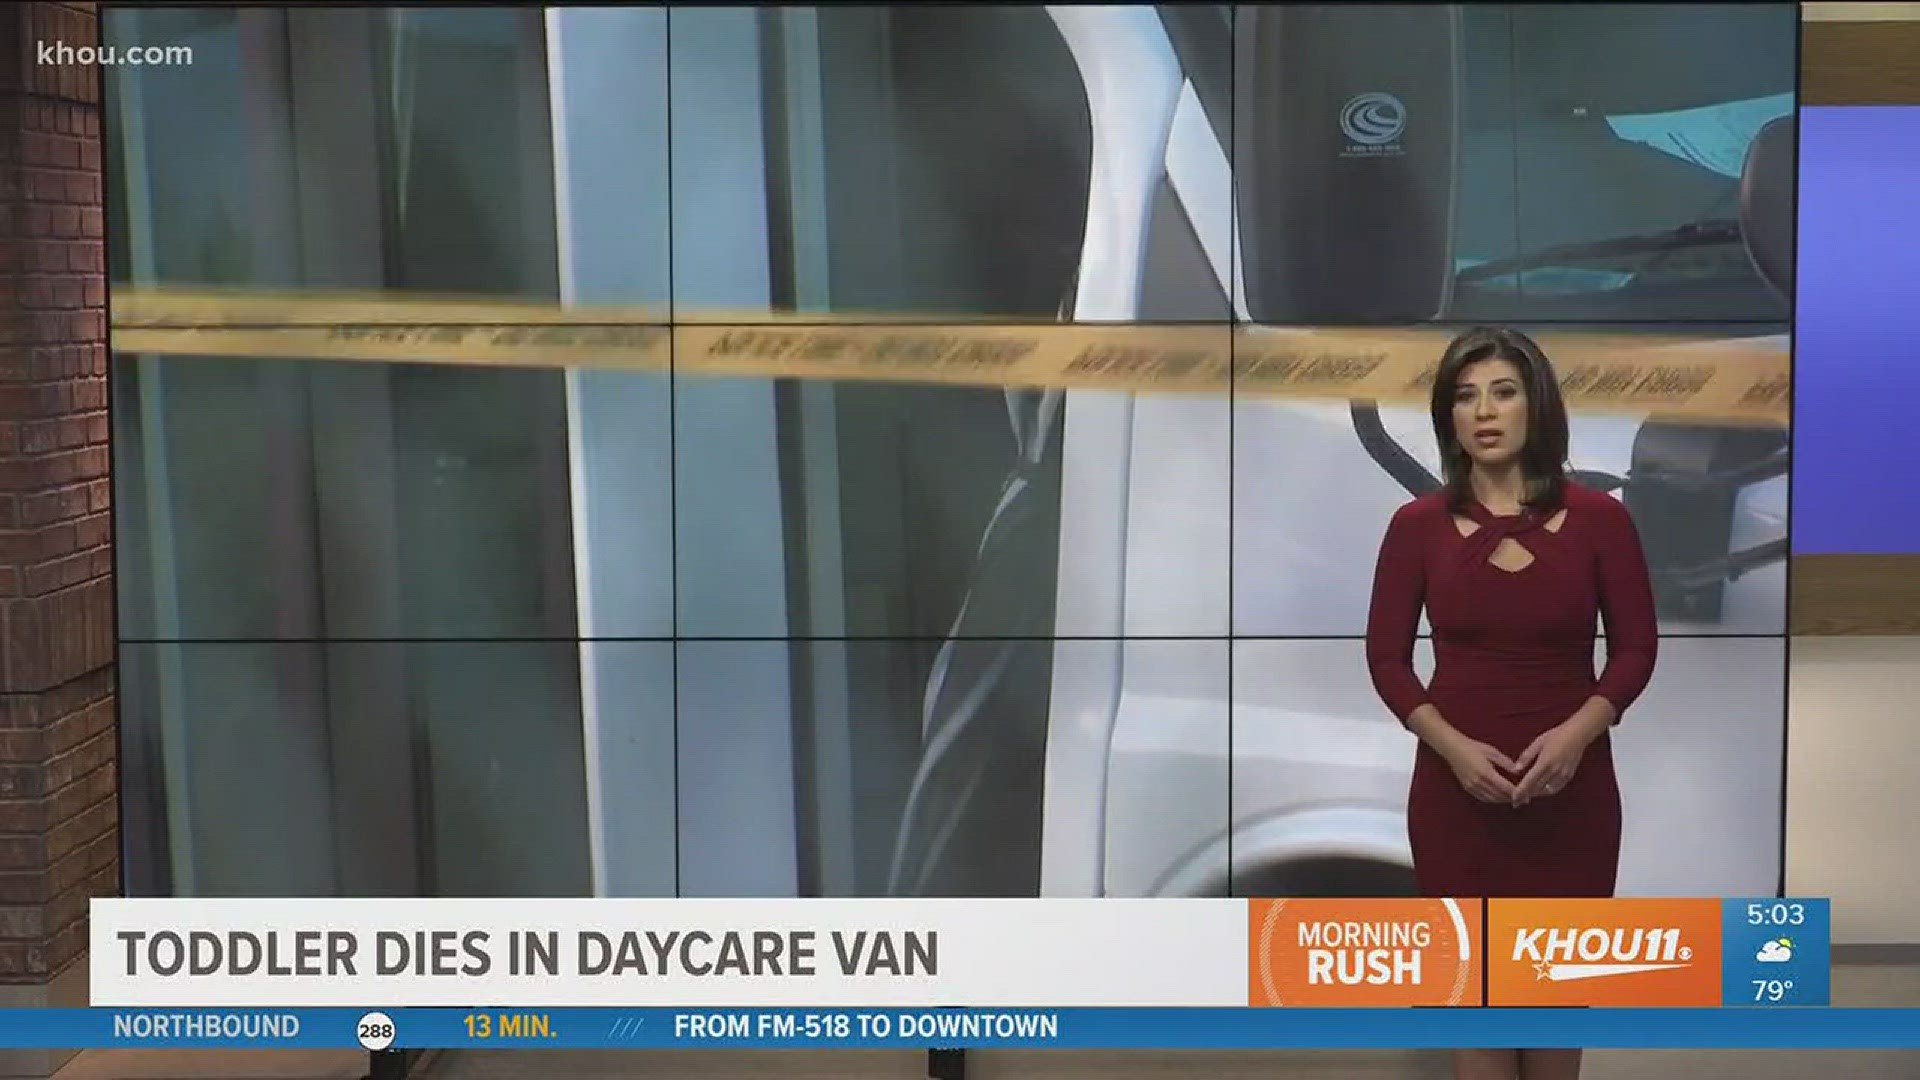 A child dies after being left in a hot daycare van and the forecast shows temps rising over the weekend, these are some of our headlines this Friday morning.